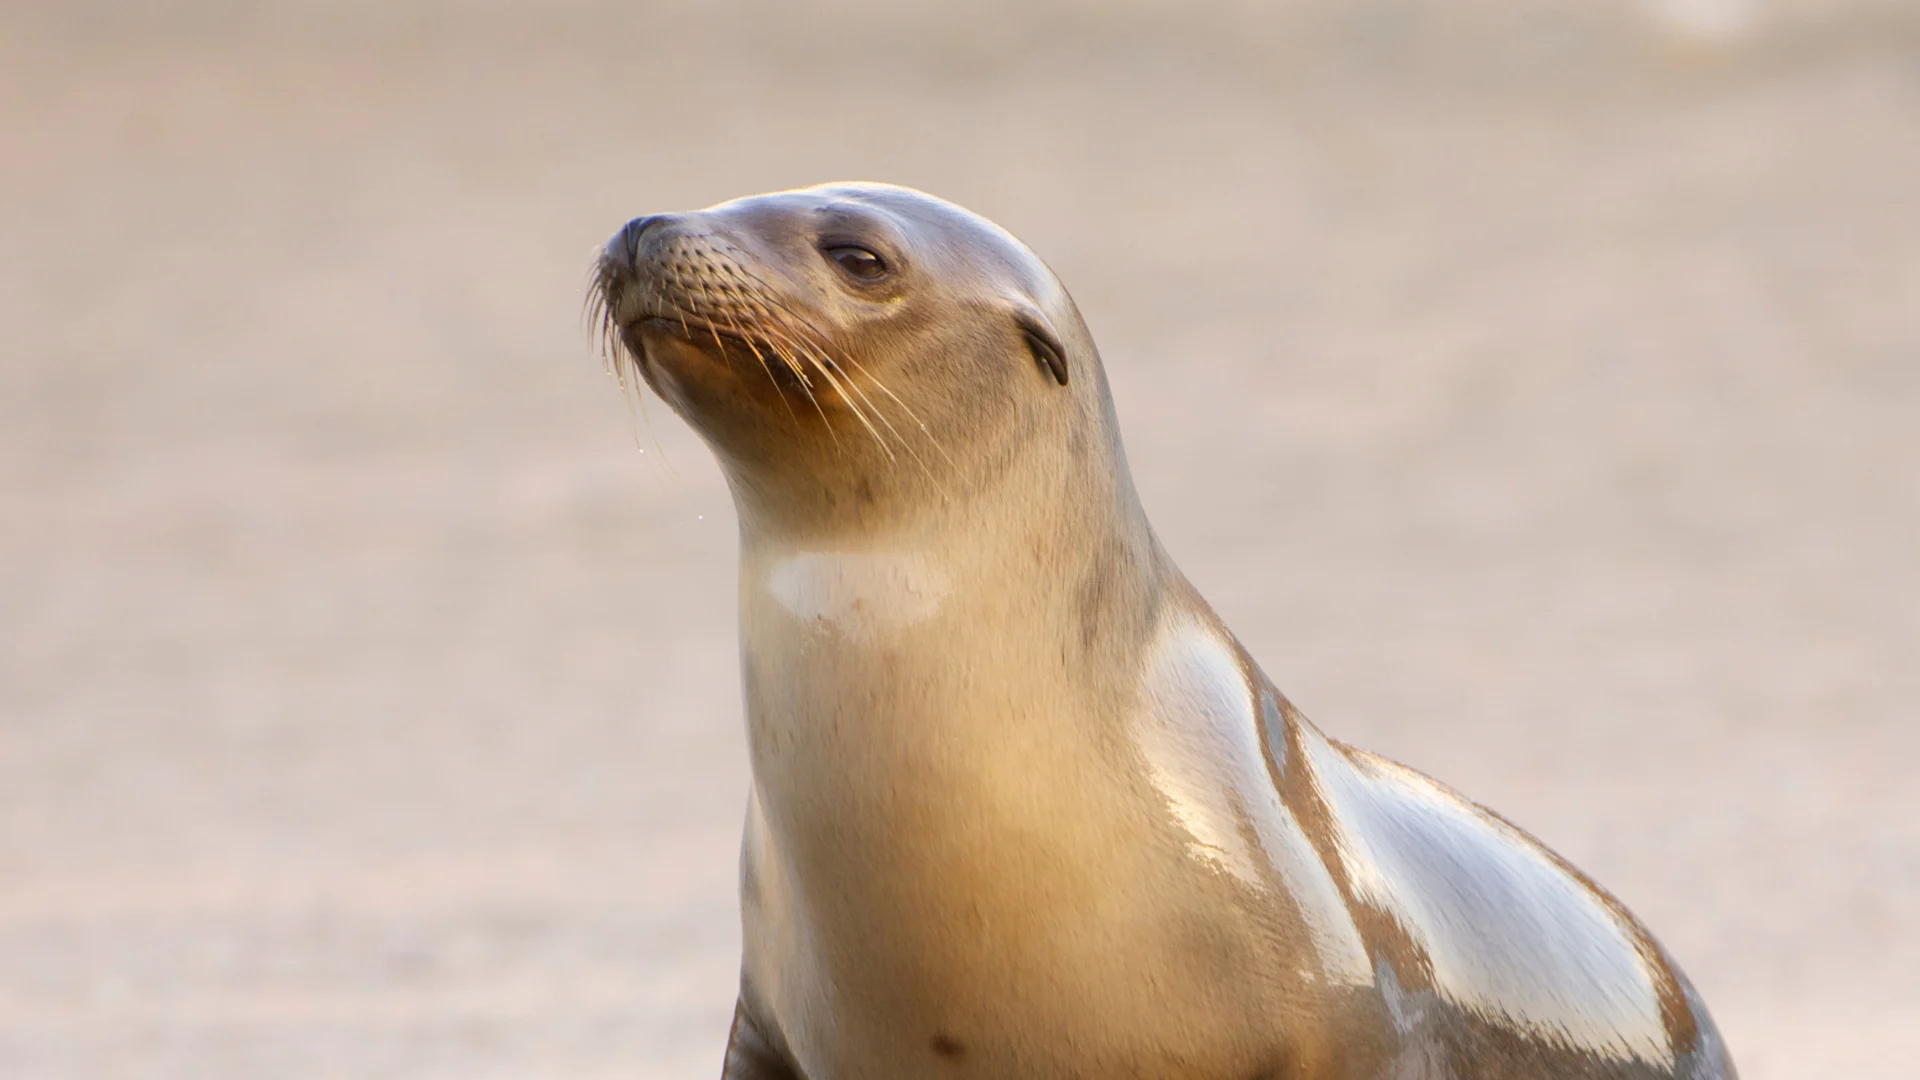 Toxic algae is causing normally gentle sea lions to become aggressive